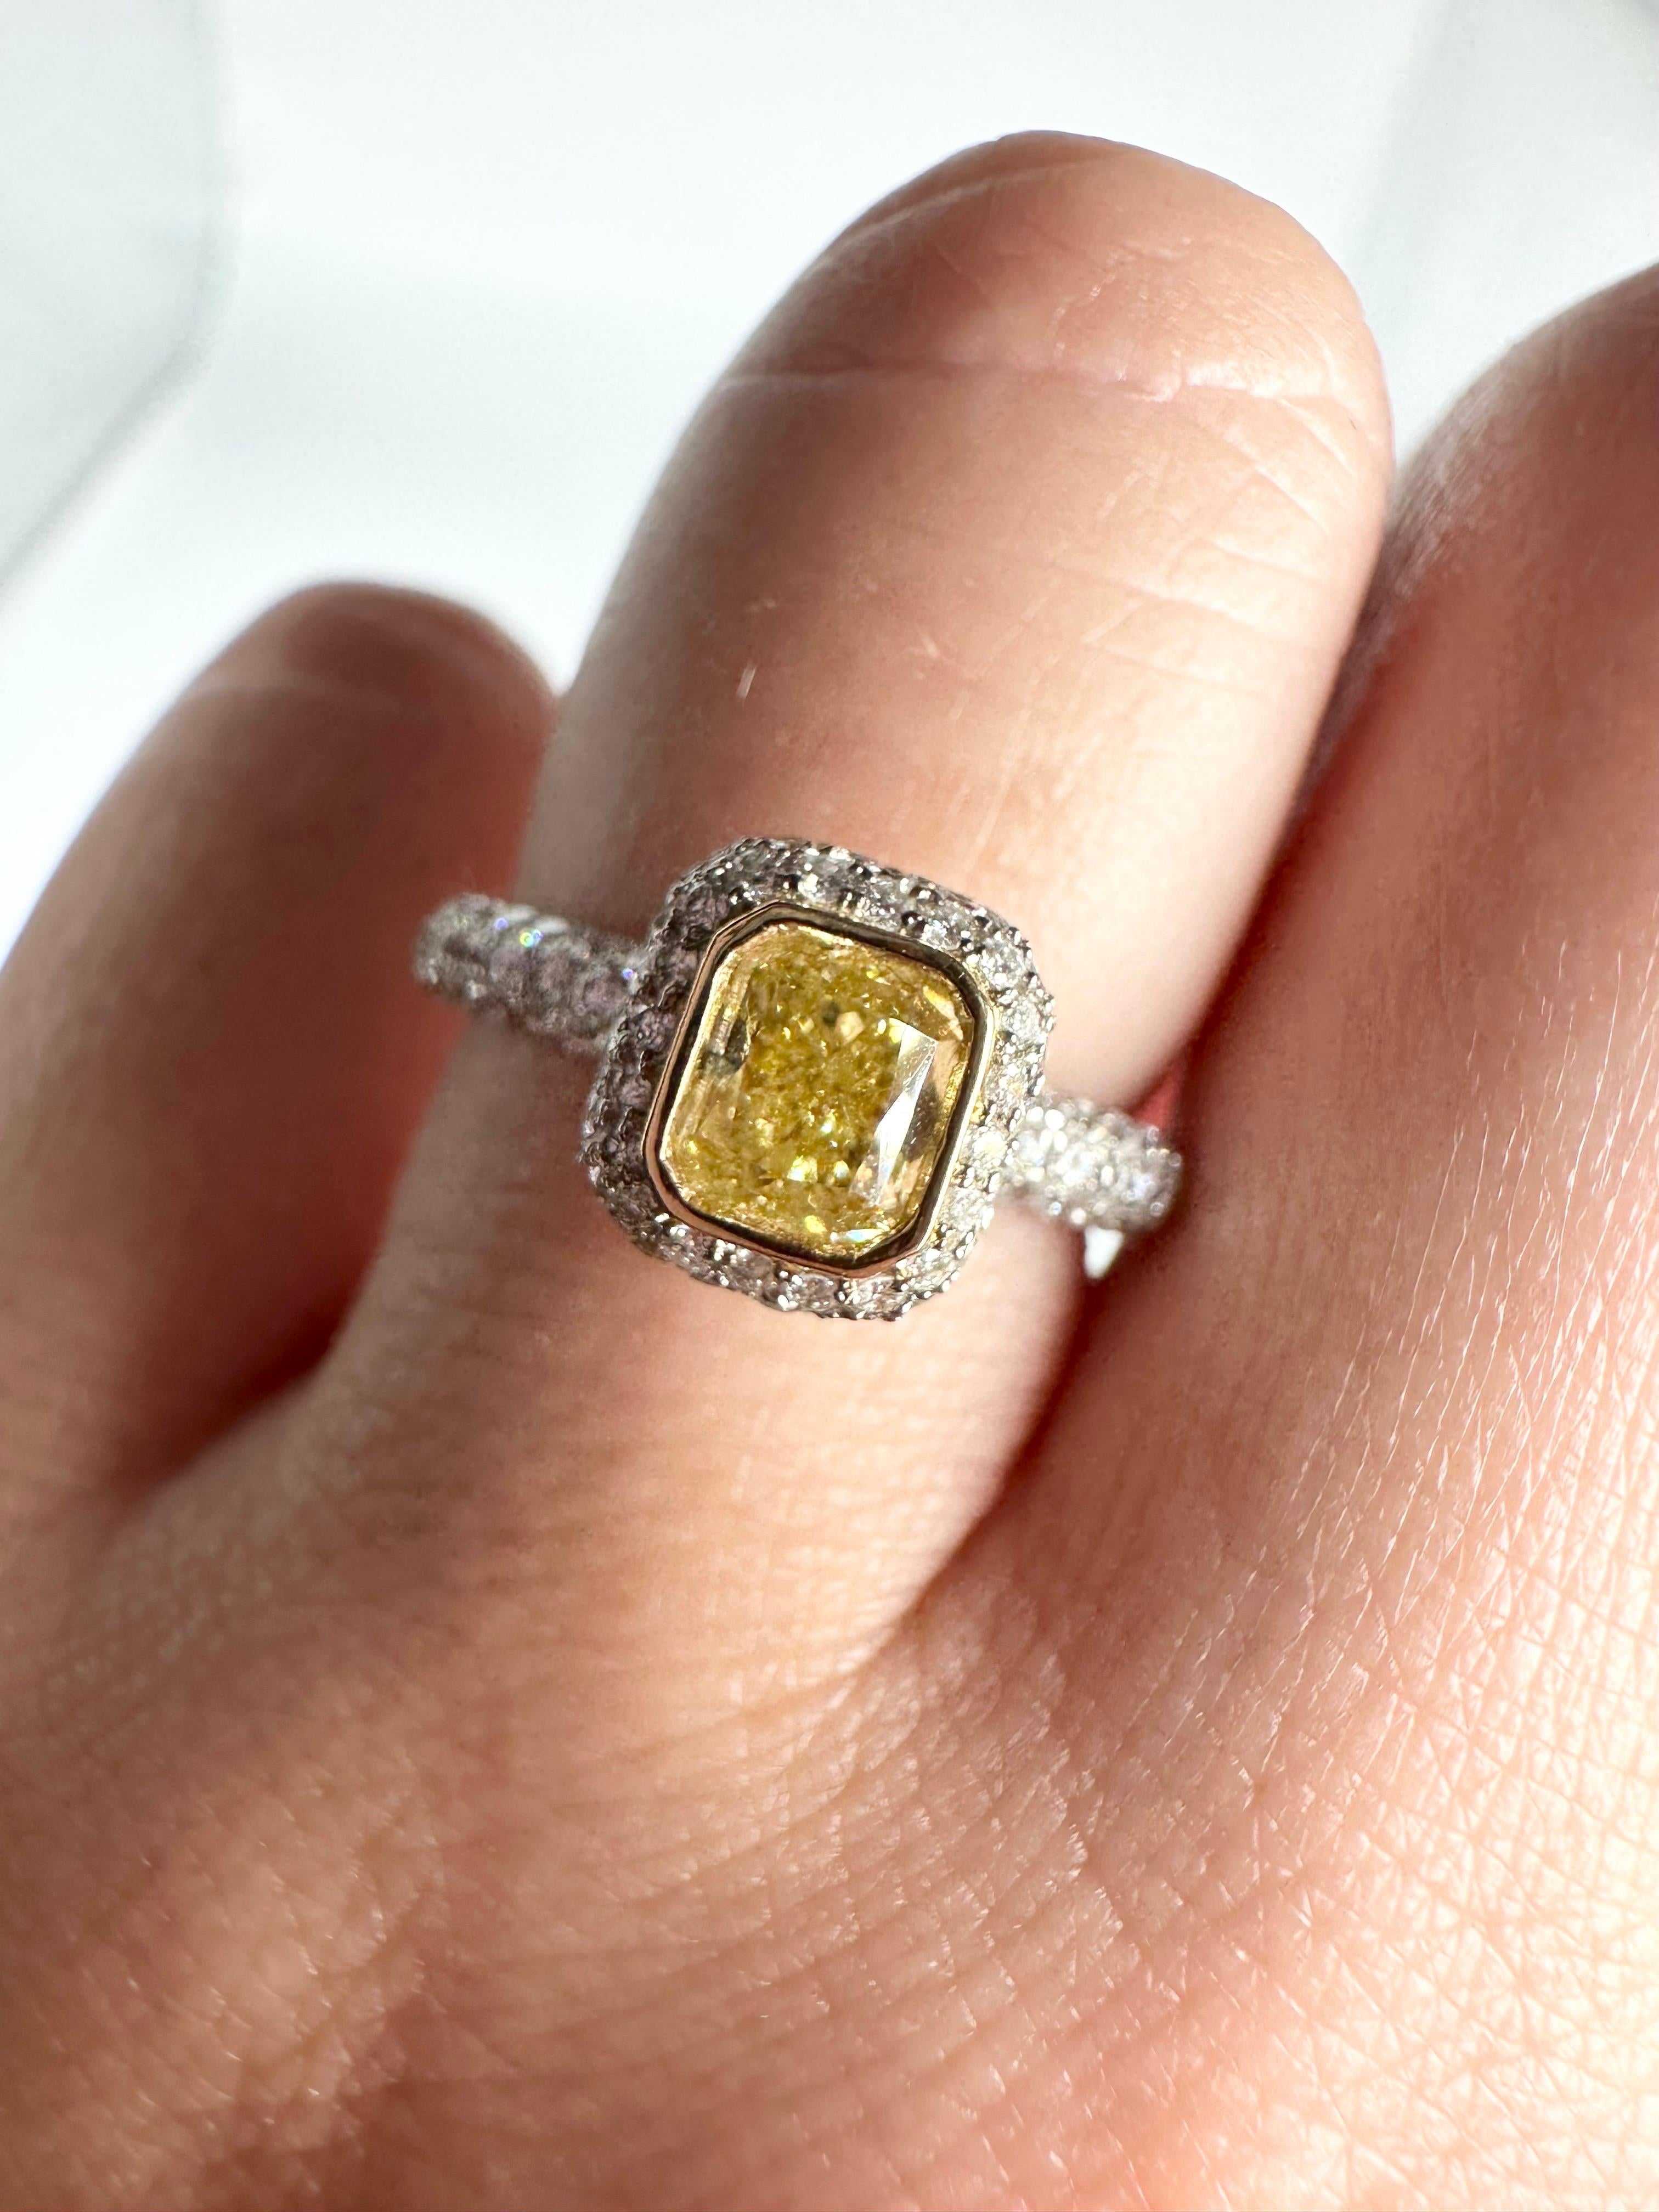 Remarkable 1ct center diamond ring with a stunning fancy yellow diamond and pave diamonds throughout in 18kt white gold, this is a custom made ring with stunning personality and luxurious design!

GOLD: 18KT gold
NATURAL DIAMOND(S)
Clarity/Color: